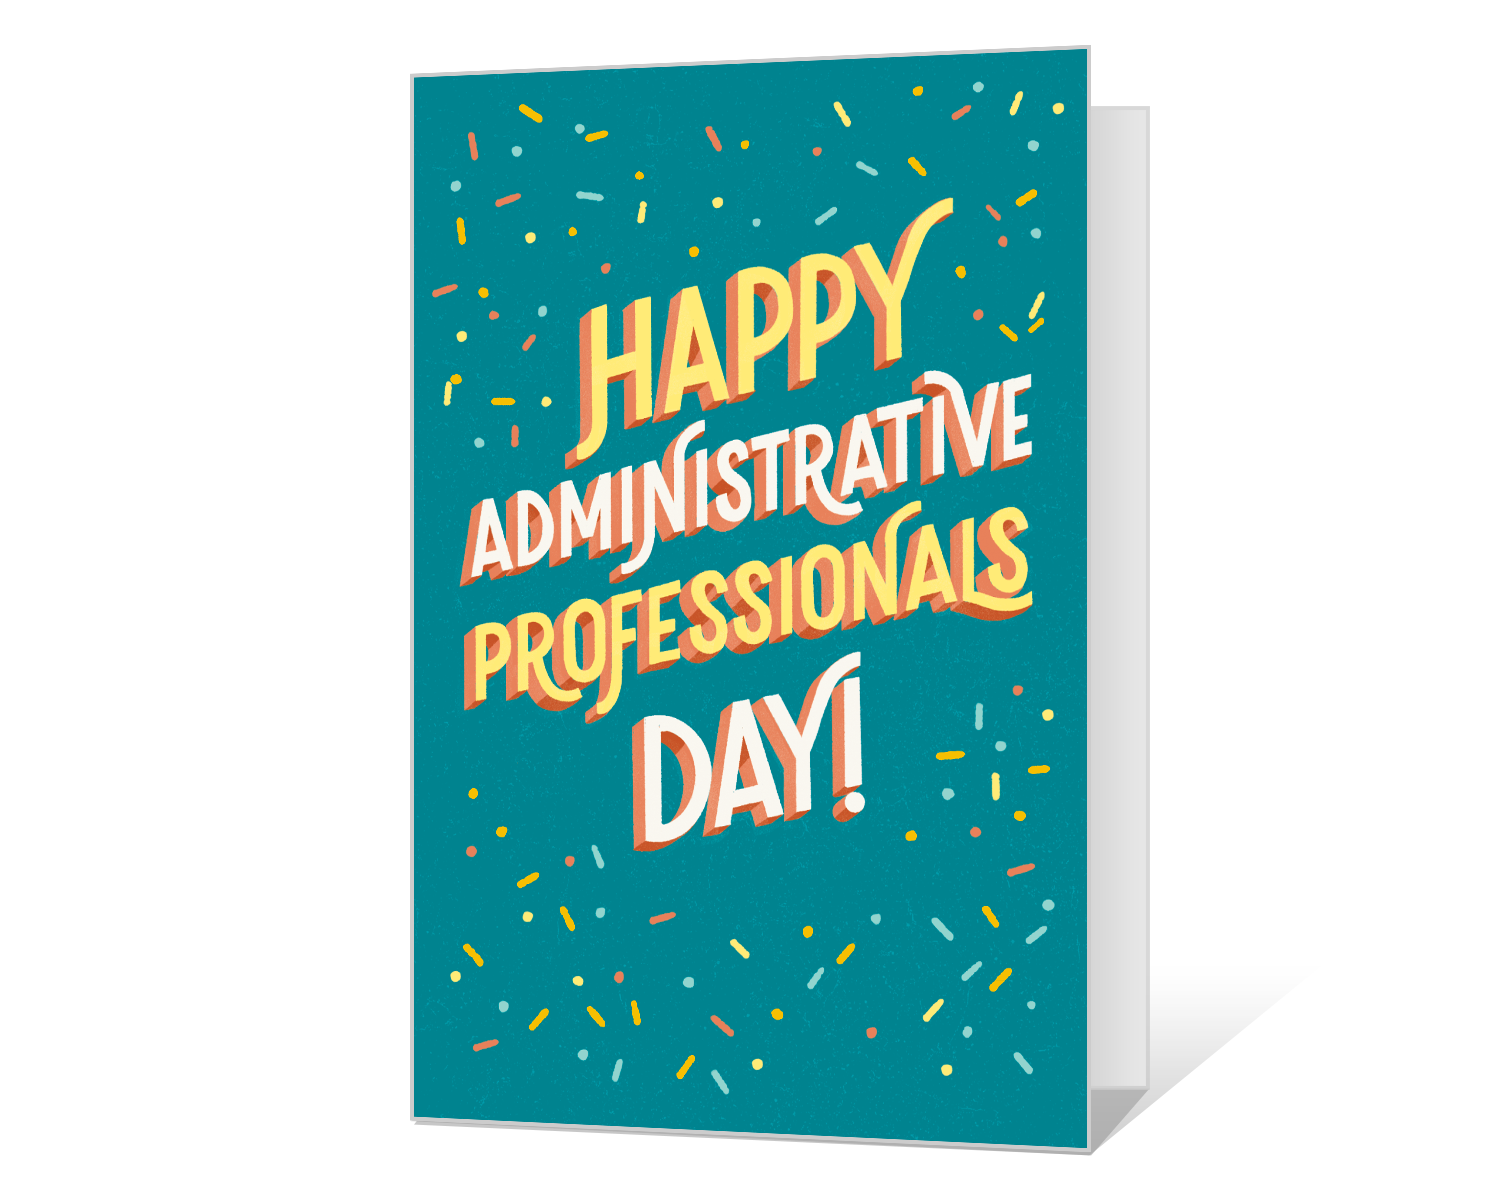 Happy Administrative Professionals Day! American Greetings